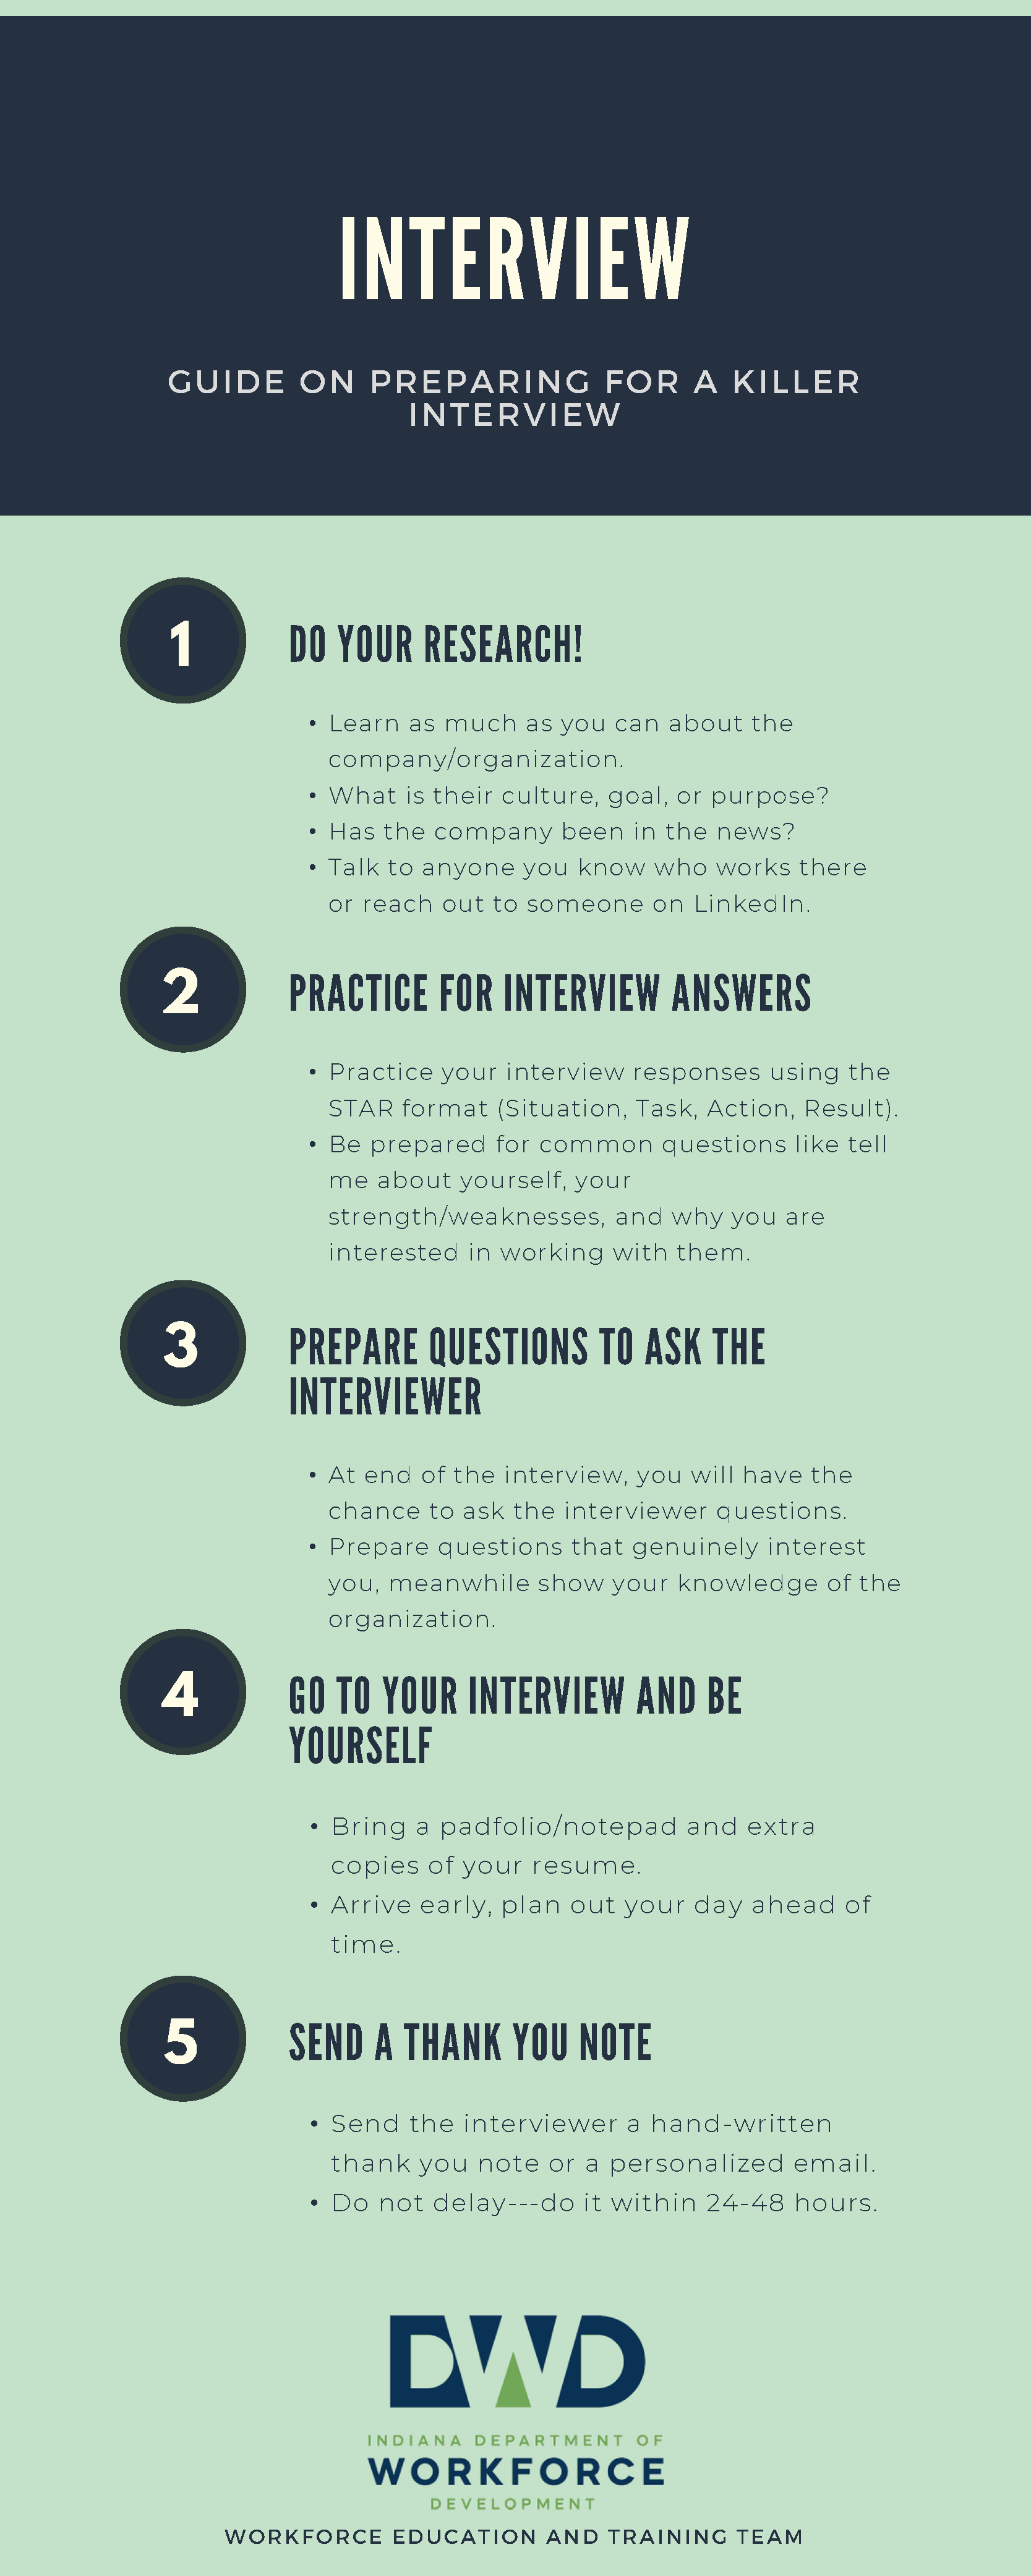 Download the Interview Guide - Click the link associated with this image to download the resource.